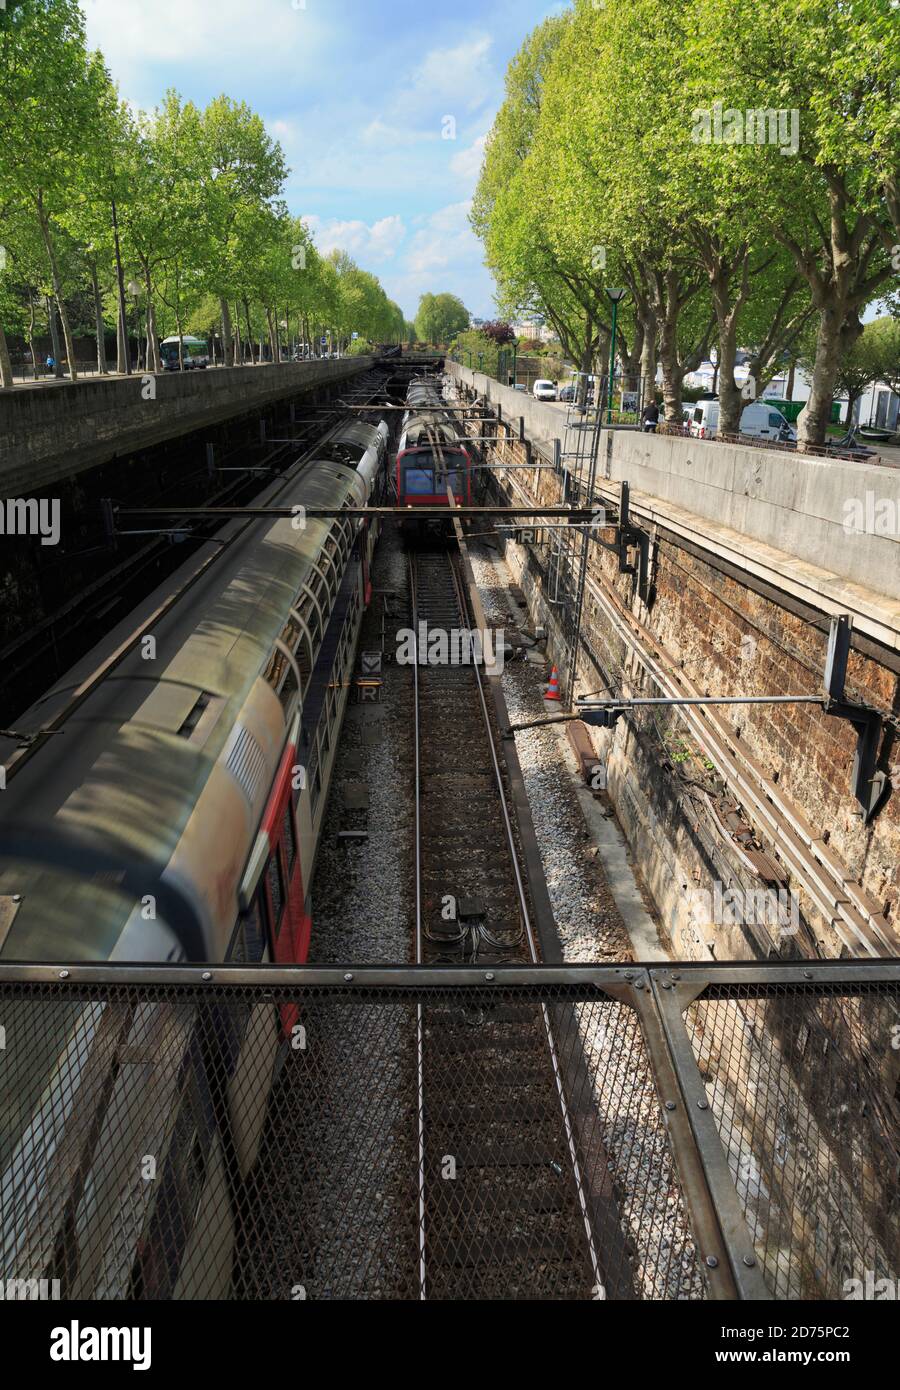 Paris RER, Line C. The RER is part of the public transportation system of Paris.  These trains connect the centre of Paris to the outlying suburbs. Stock Photo